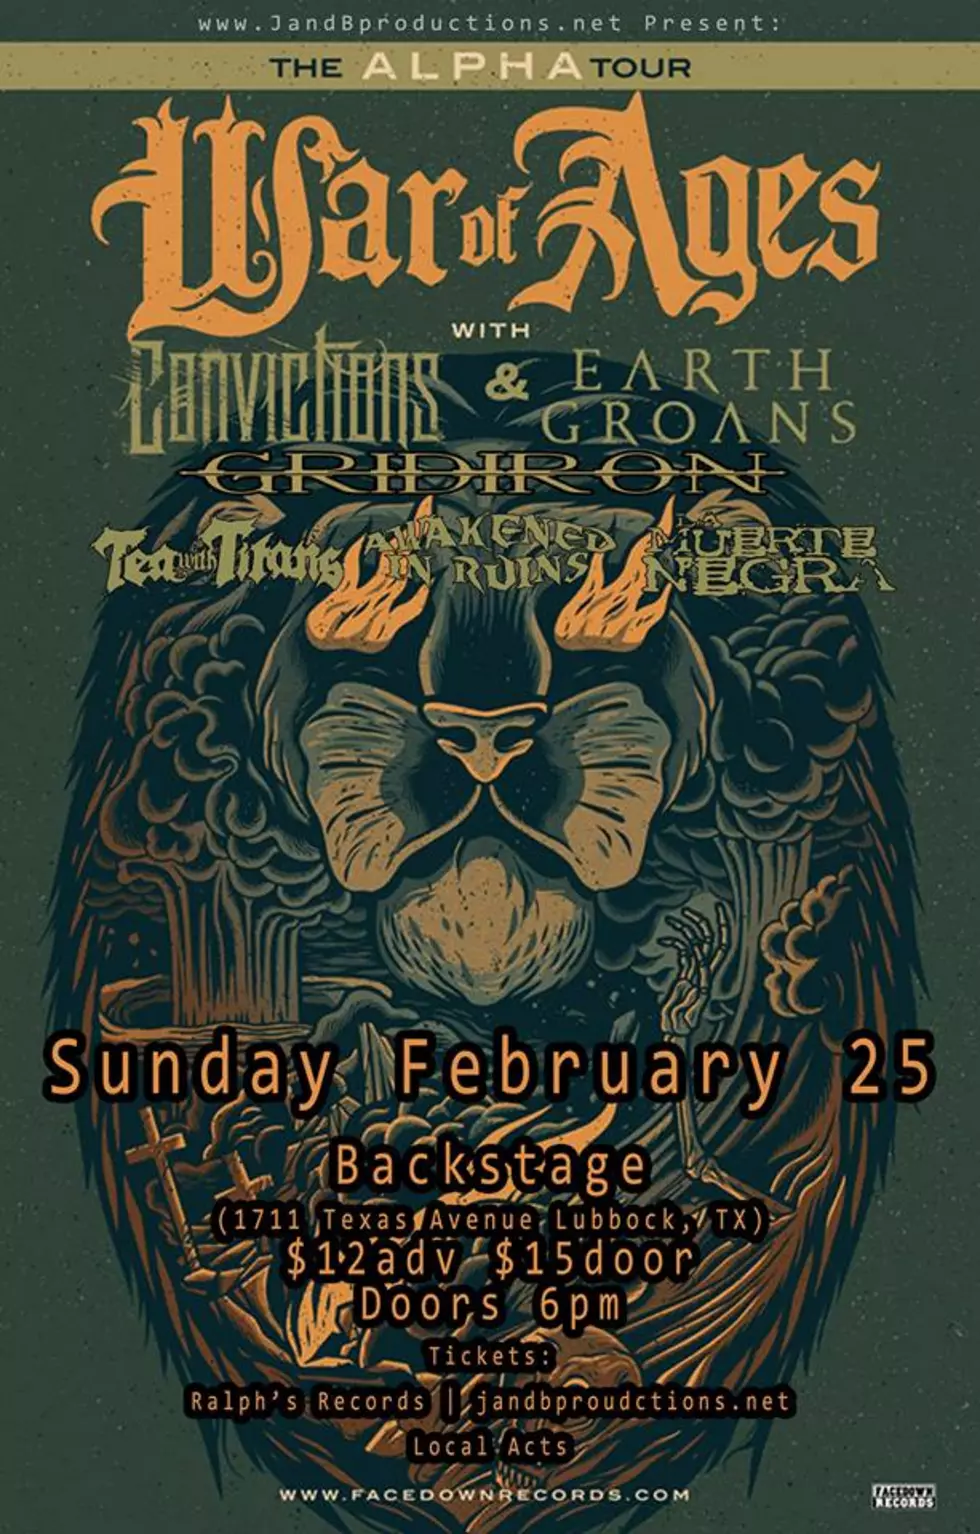 War Of Ages And The ‘Alpha Tour’ February 25 At Backstage Lubbock